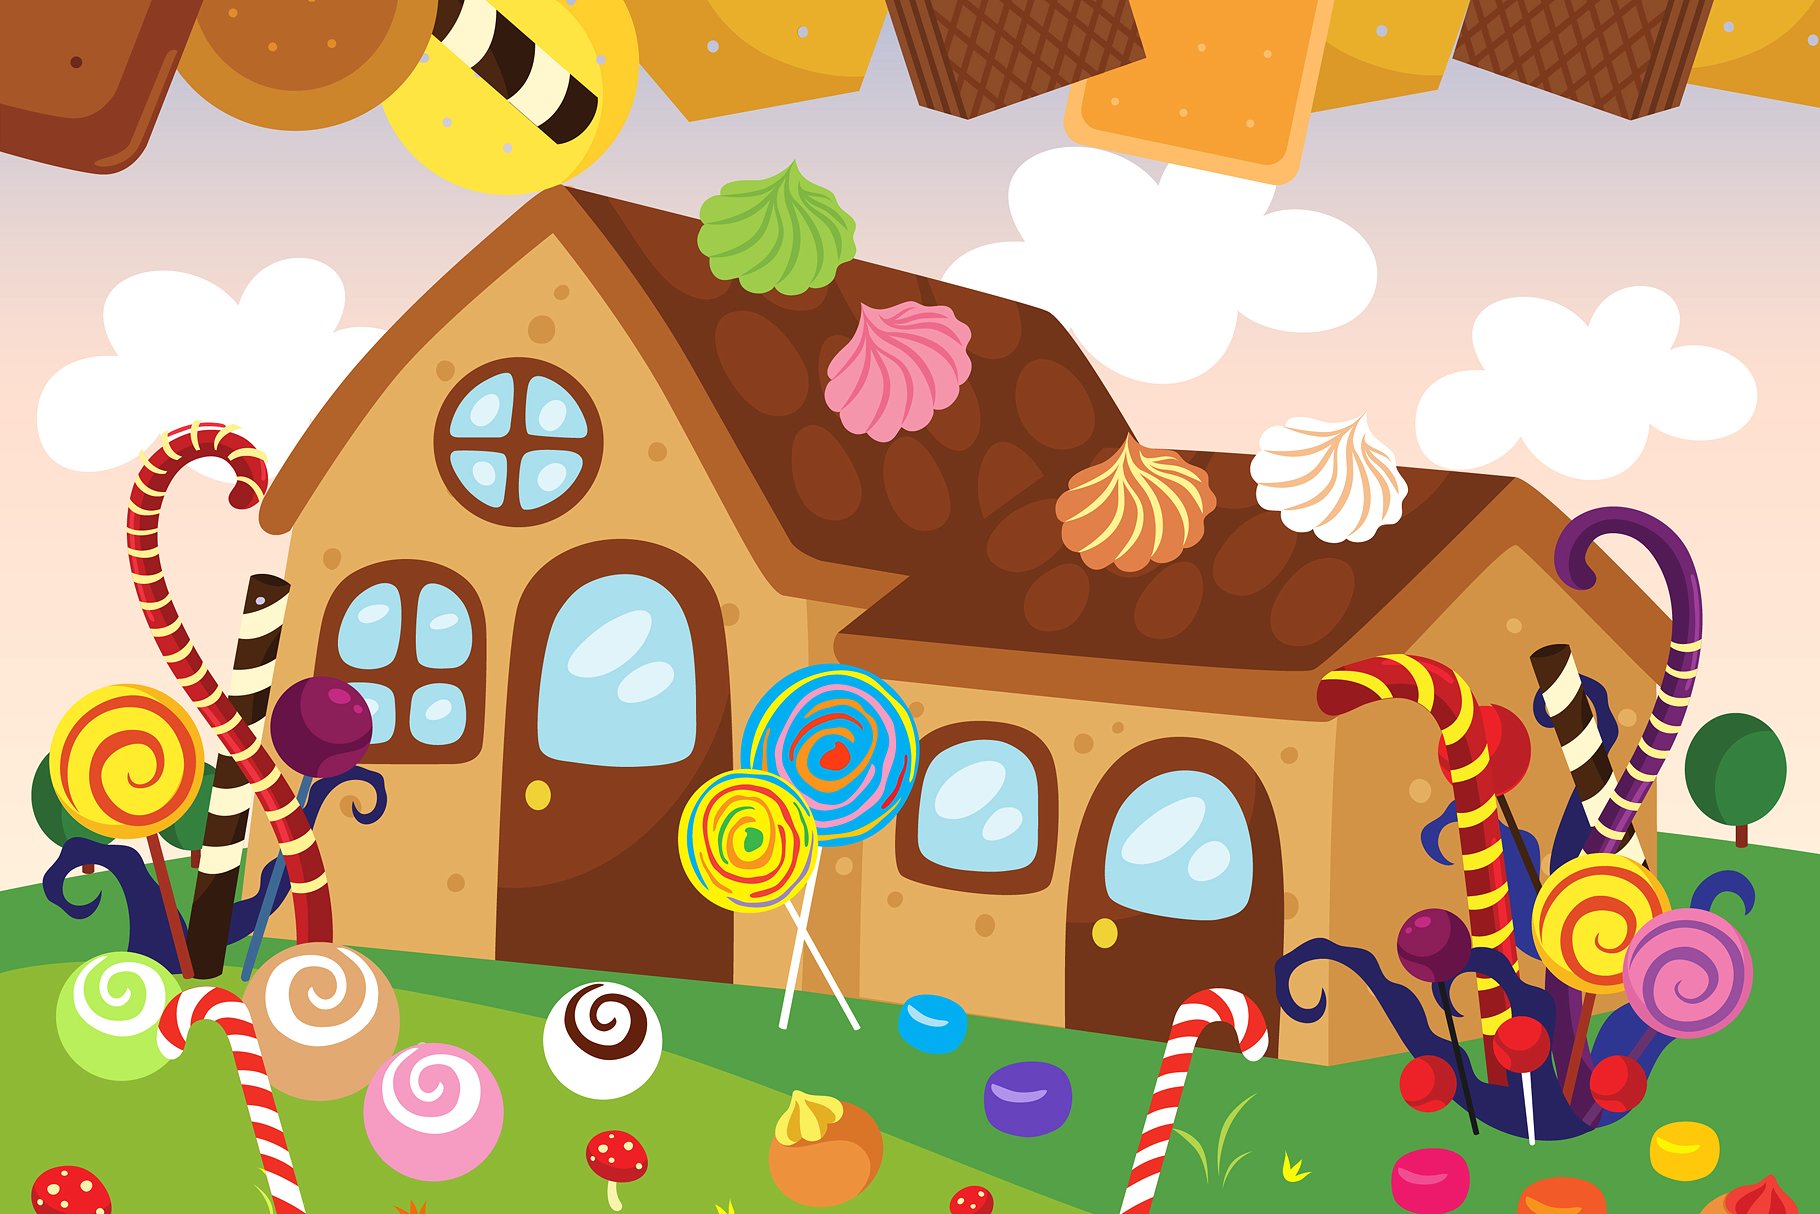 houses clipart cookie